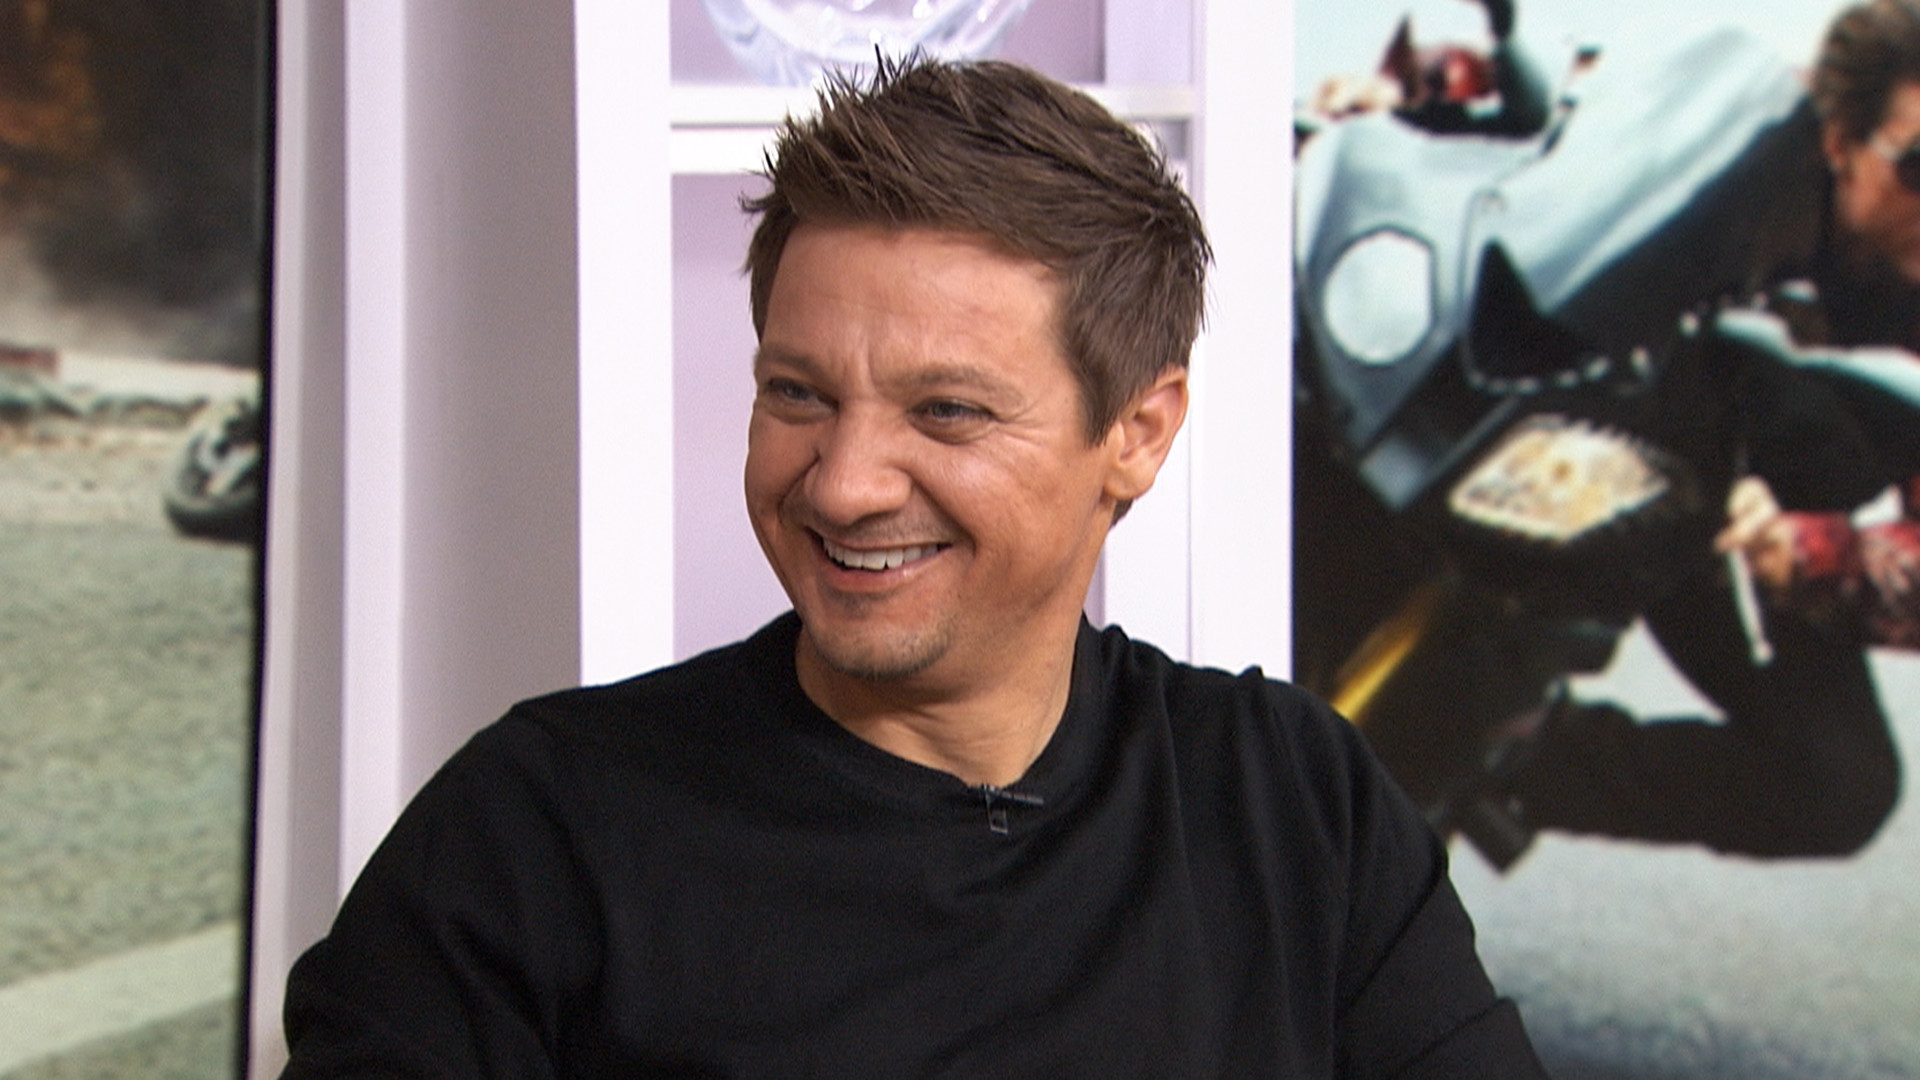 1920x1080 Jeremy Renner: Happy to let Cruise do stunts, would rather have a doughnut  - TODAY.com